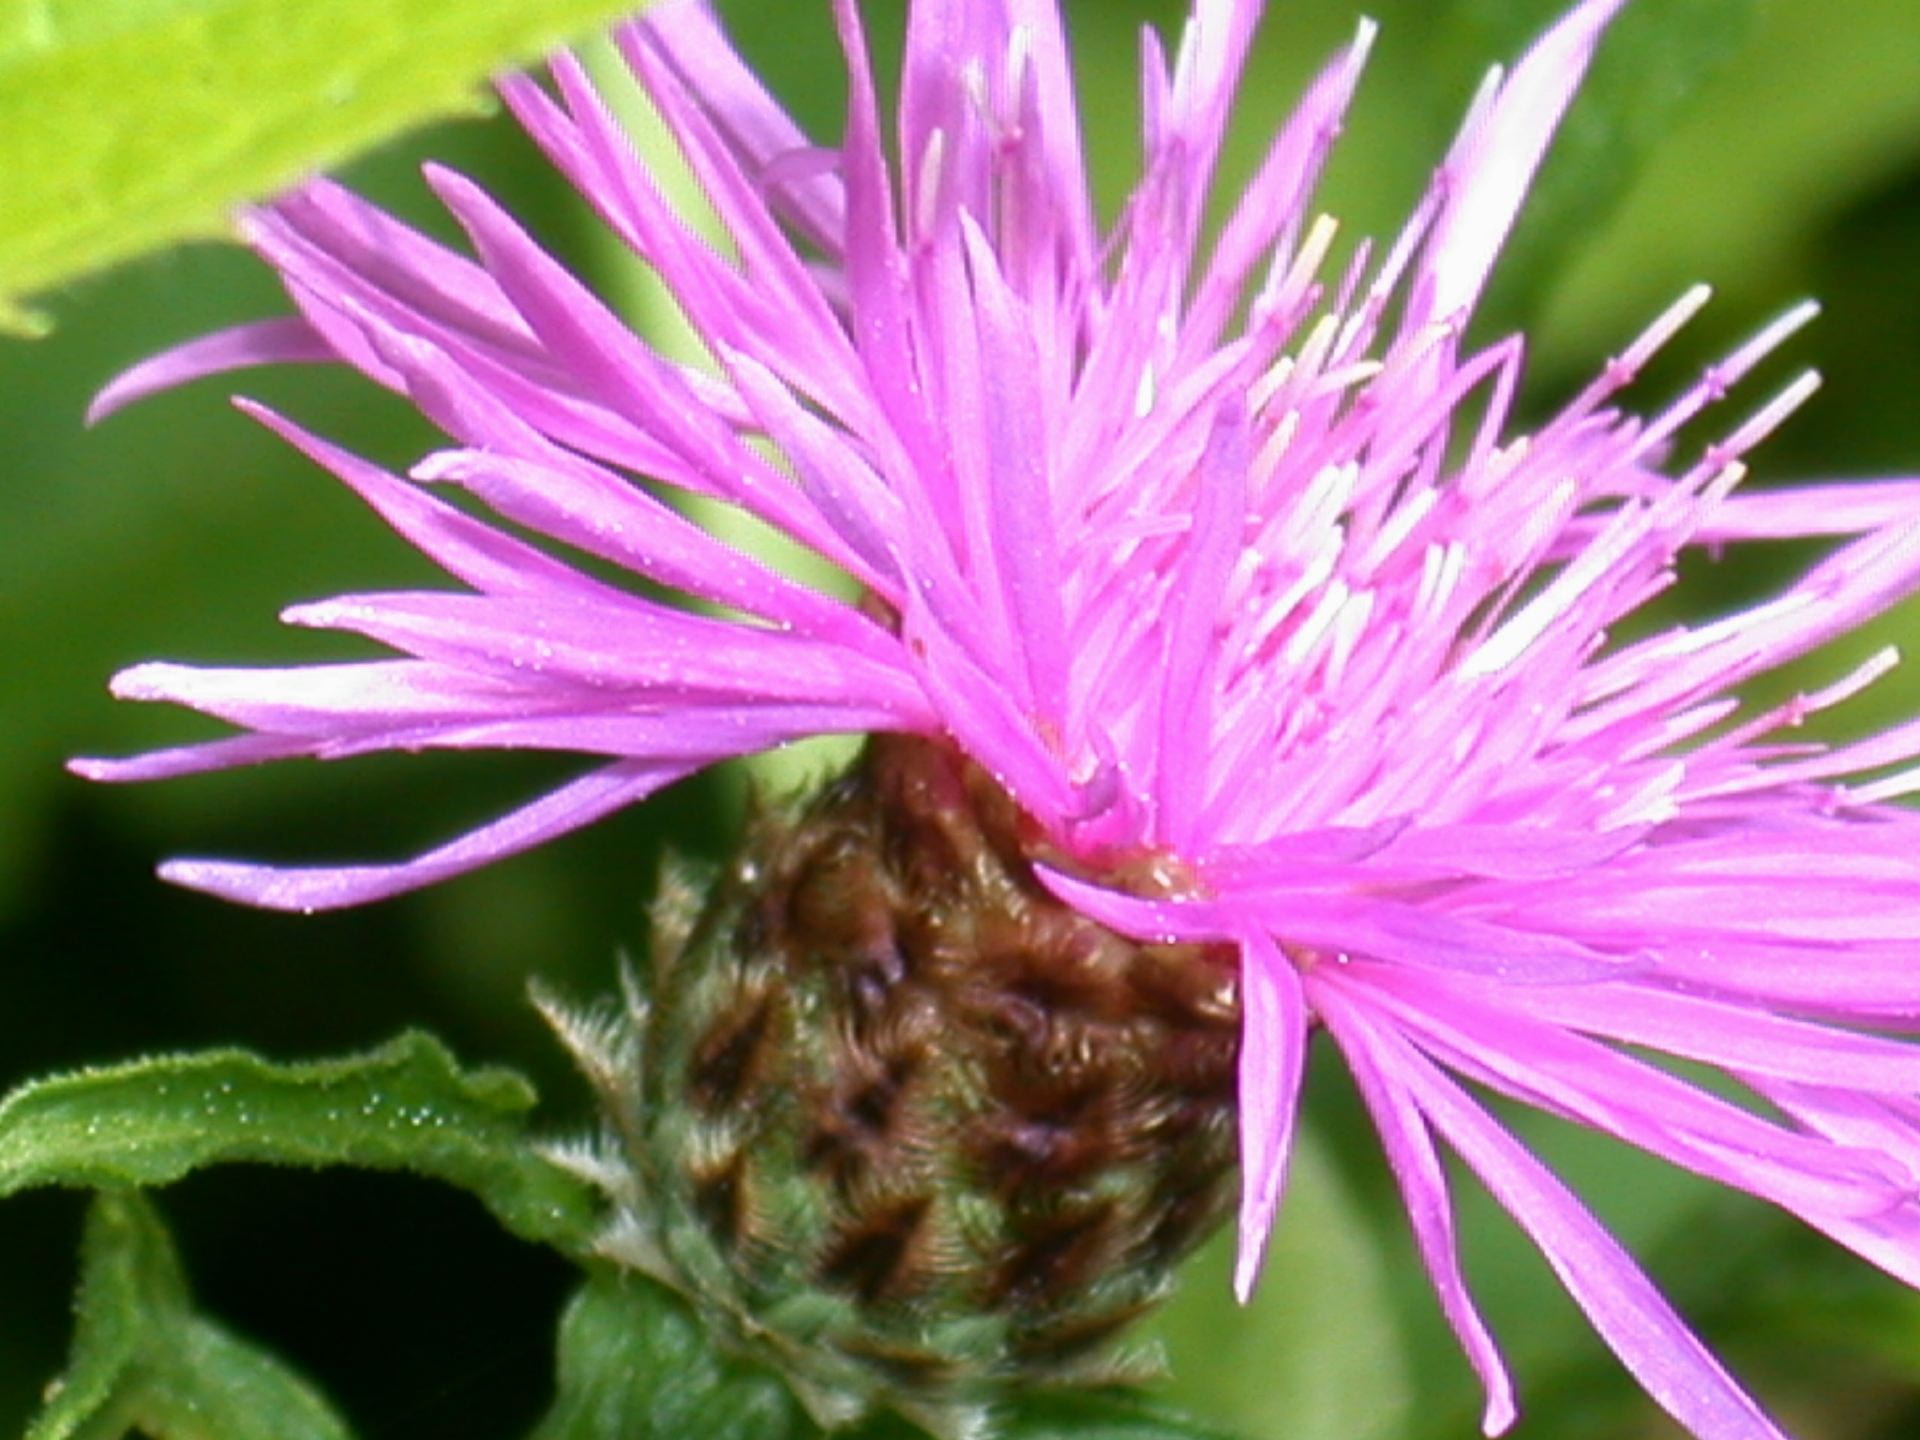 Spotted knapweed flower and bract. Photo by Antonio DiTommaso of Cornell University.